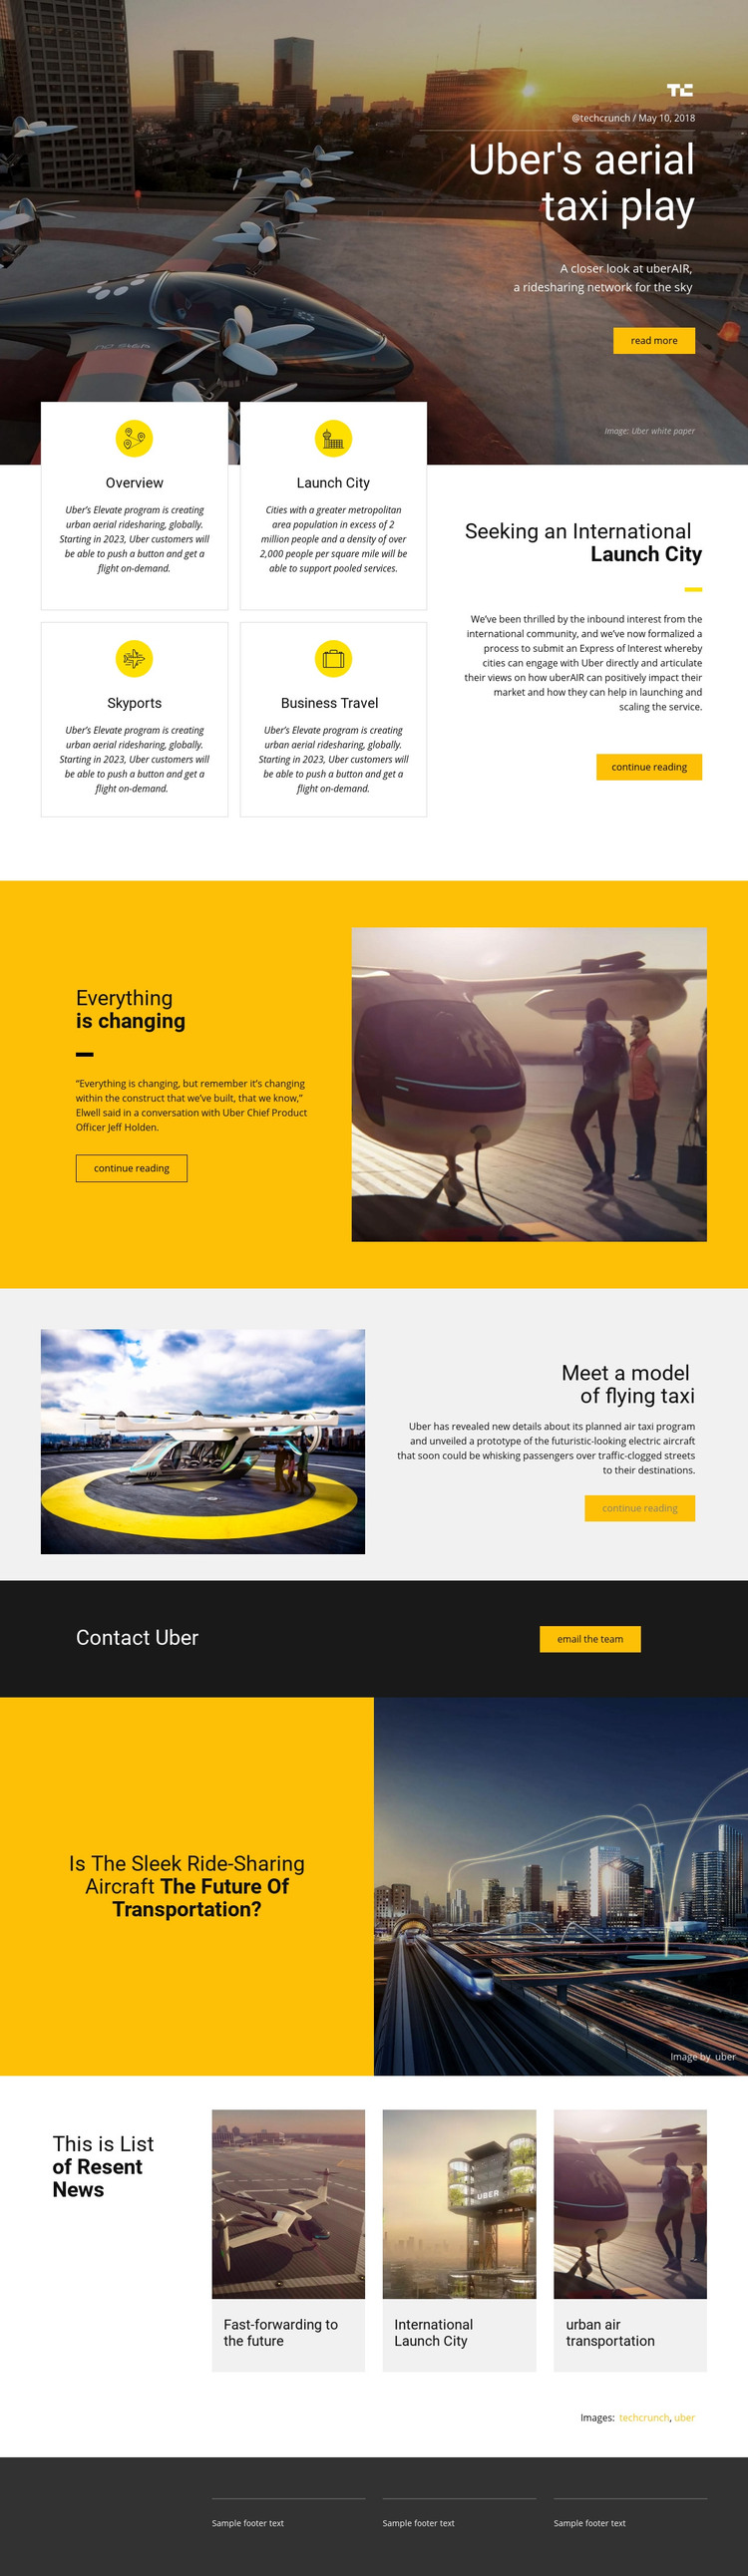 Uber's Aerial Taxi Play Homepage Design